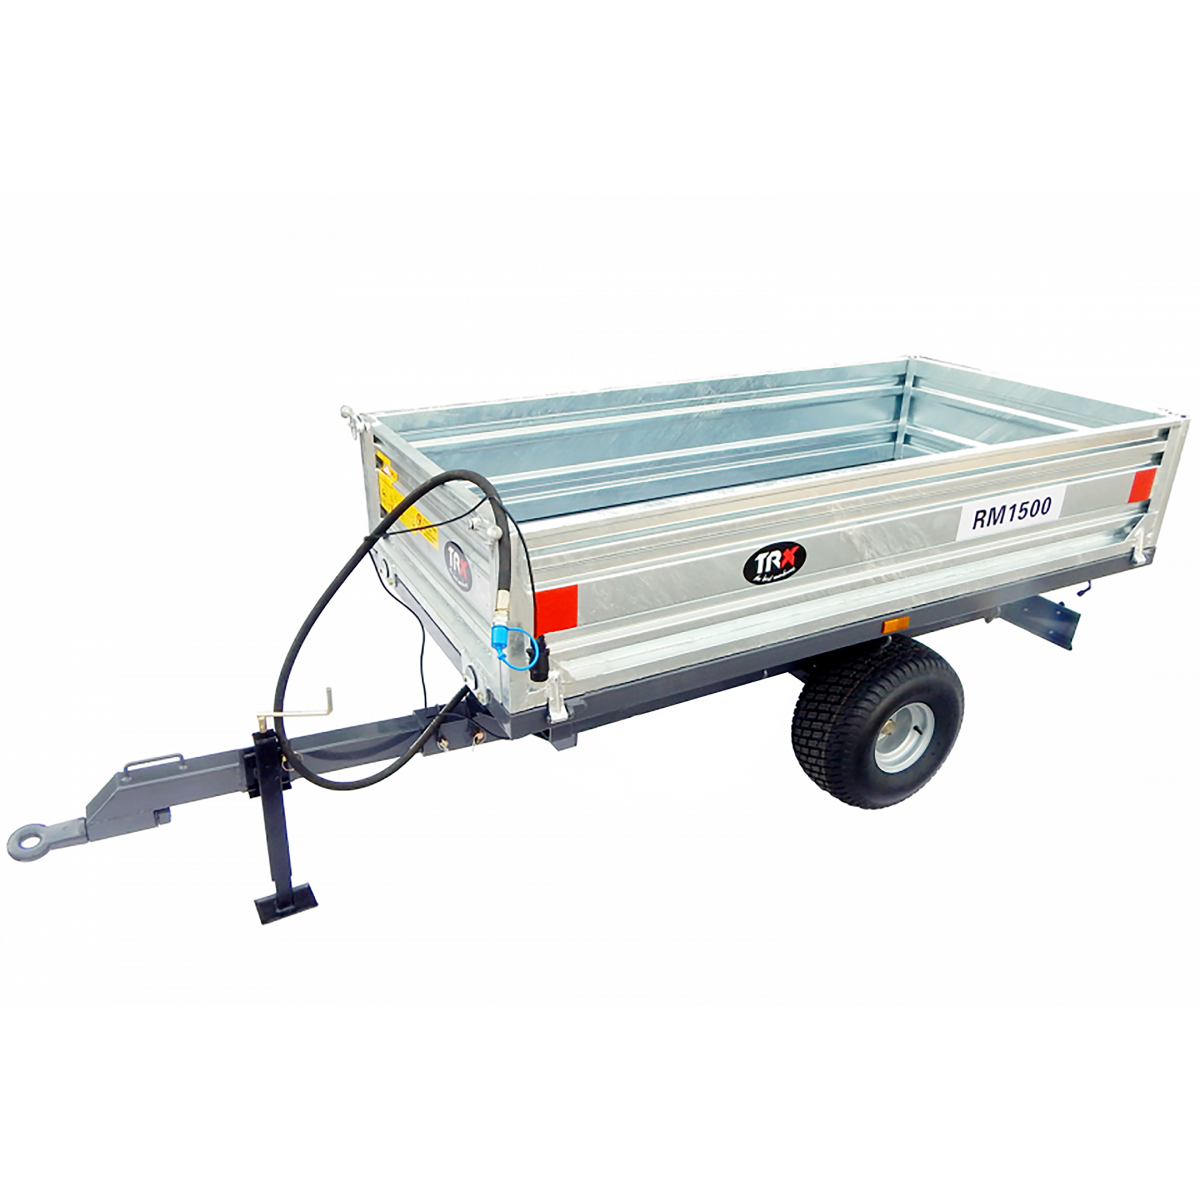 Single-axle agricultural trailer 1.5T with TRX lighting